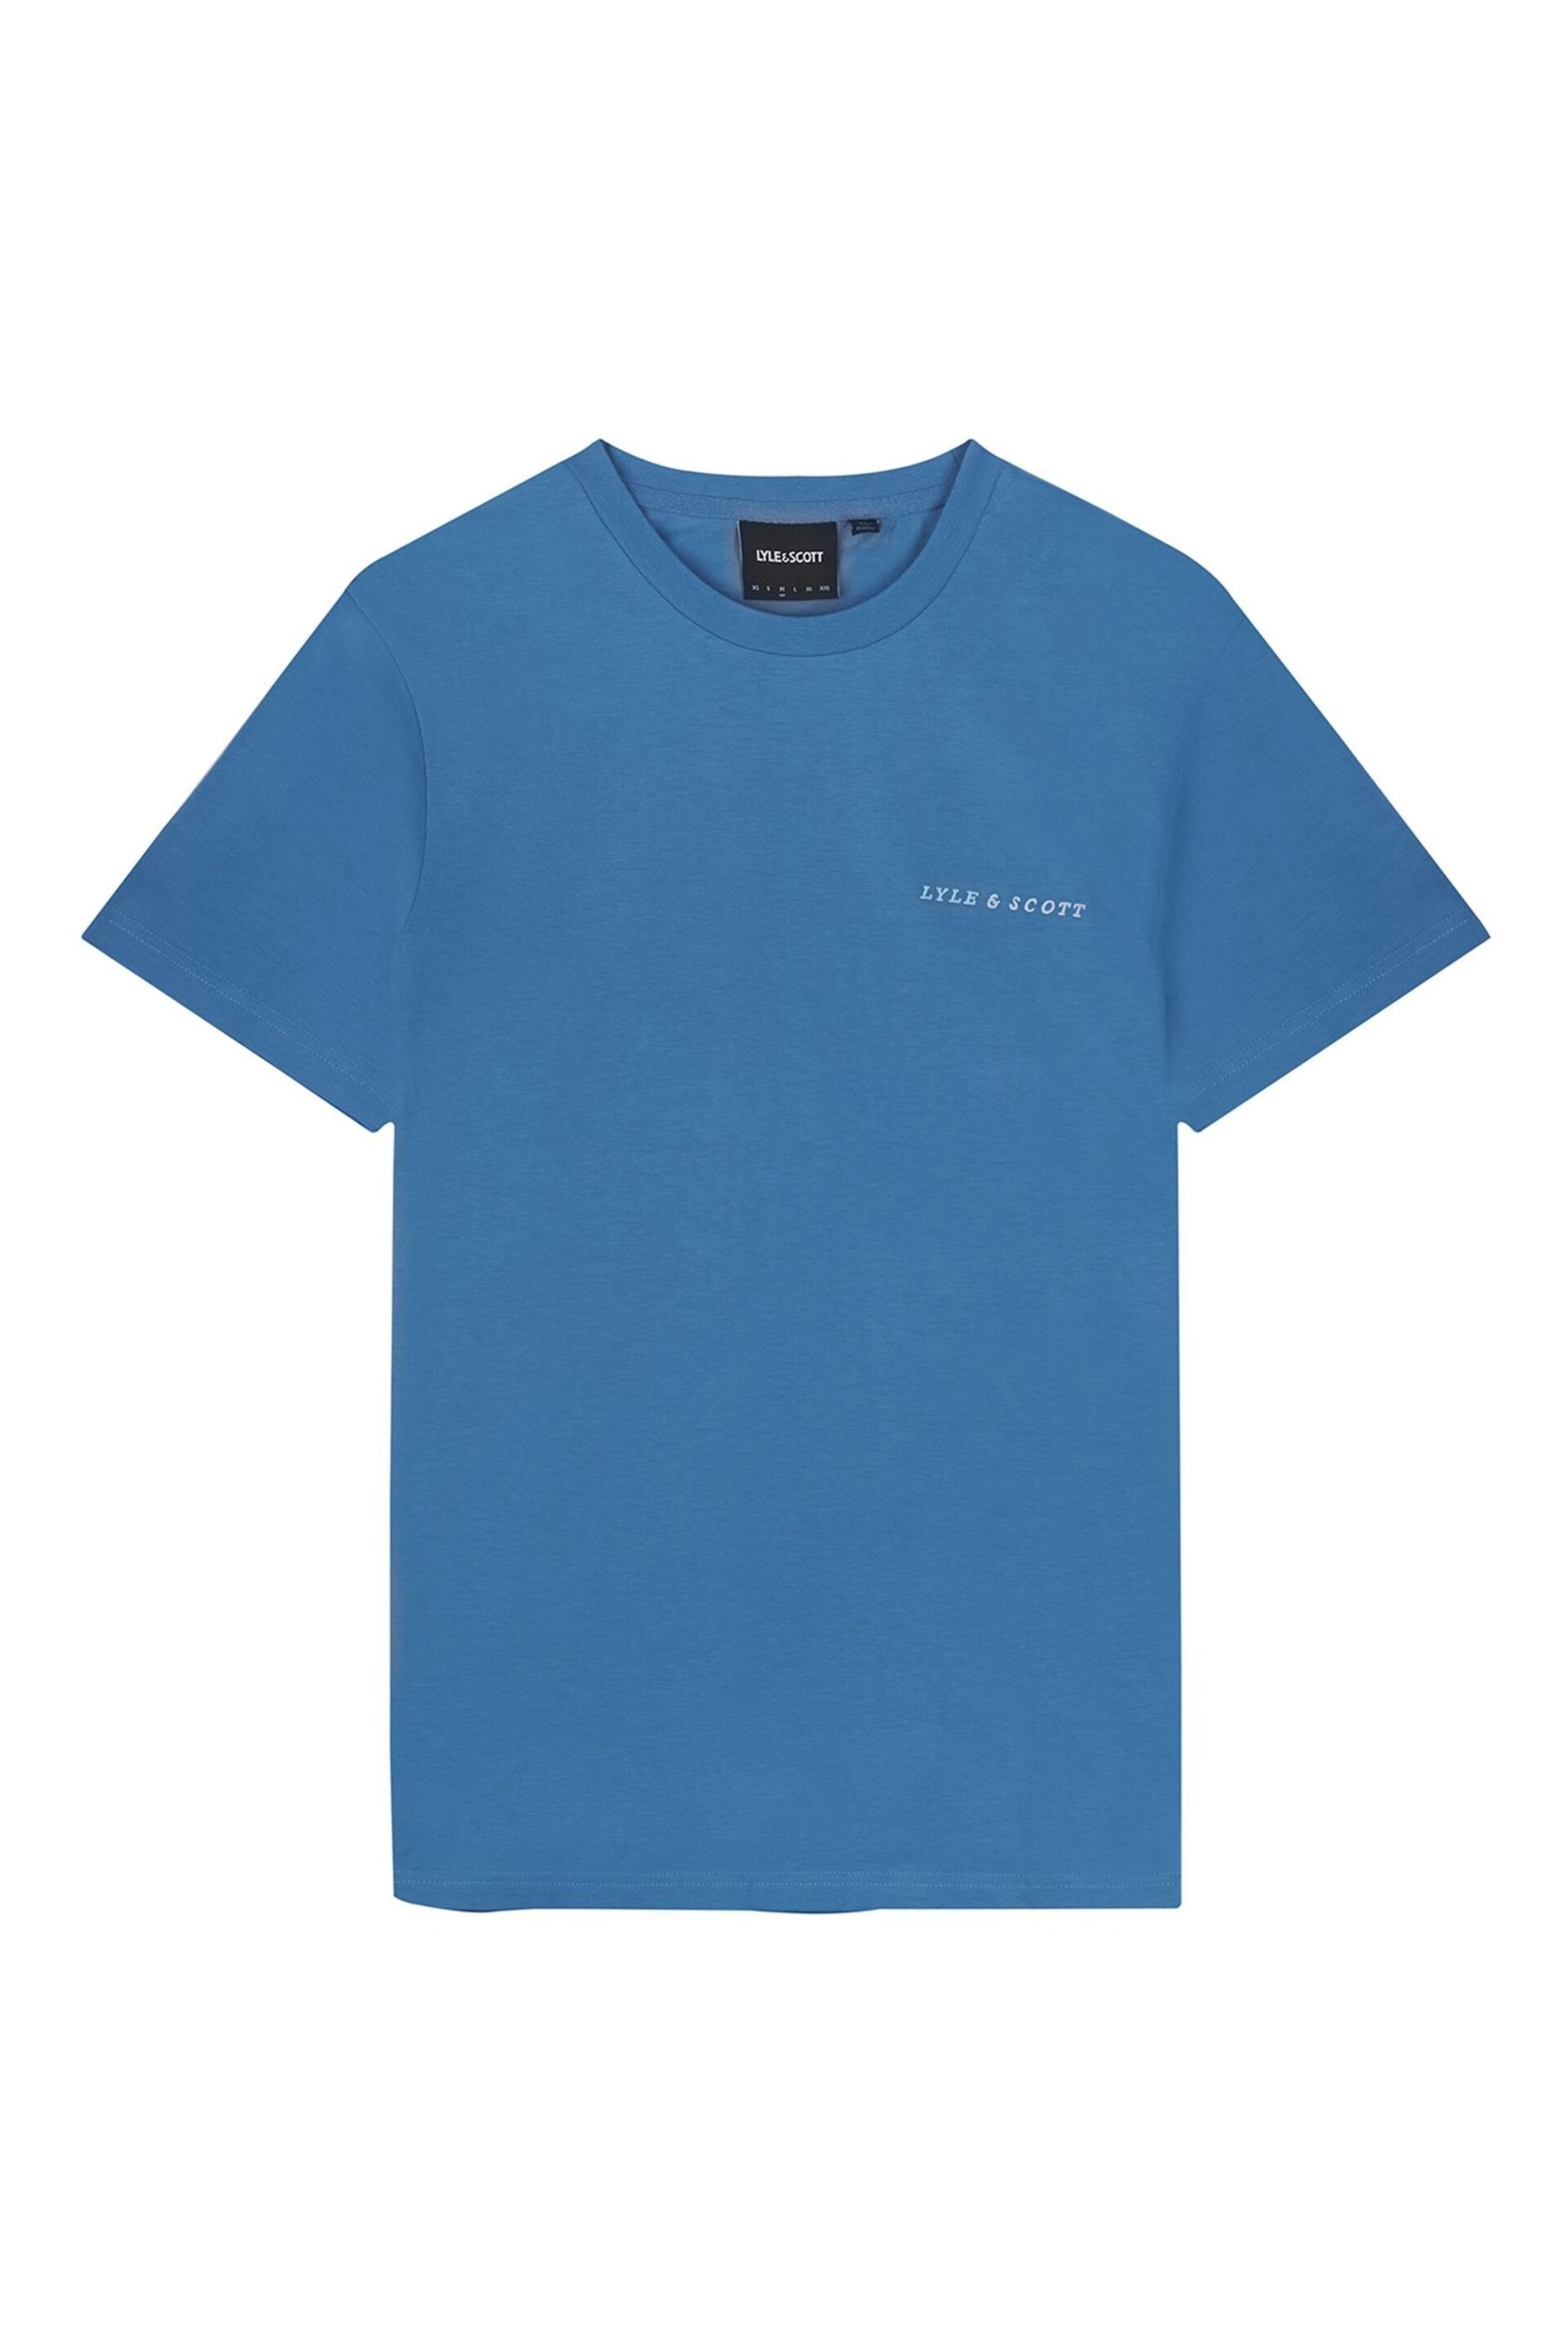 Lyle & Scott Blue Embroidered T-Shirt - Image 5 of 5